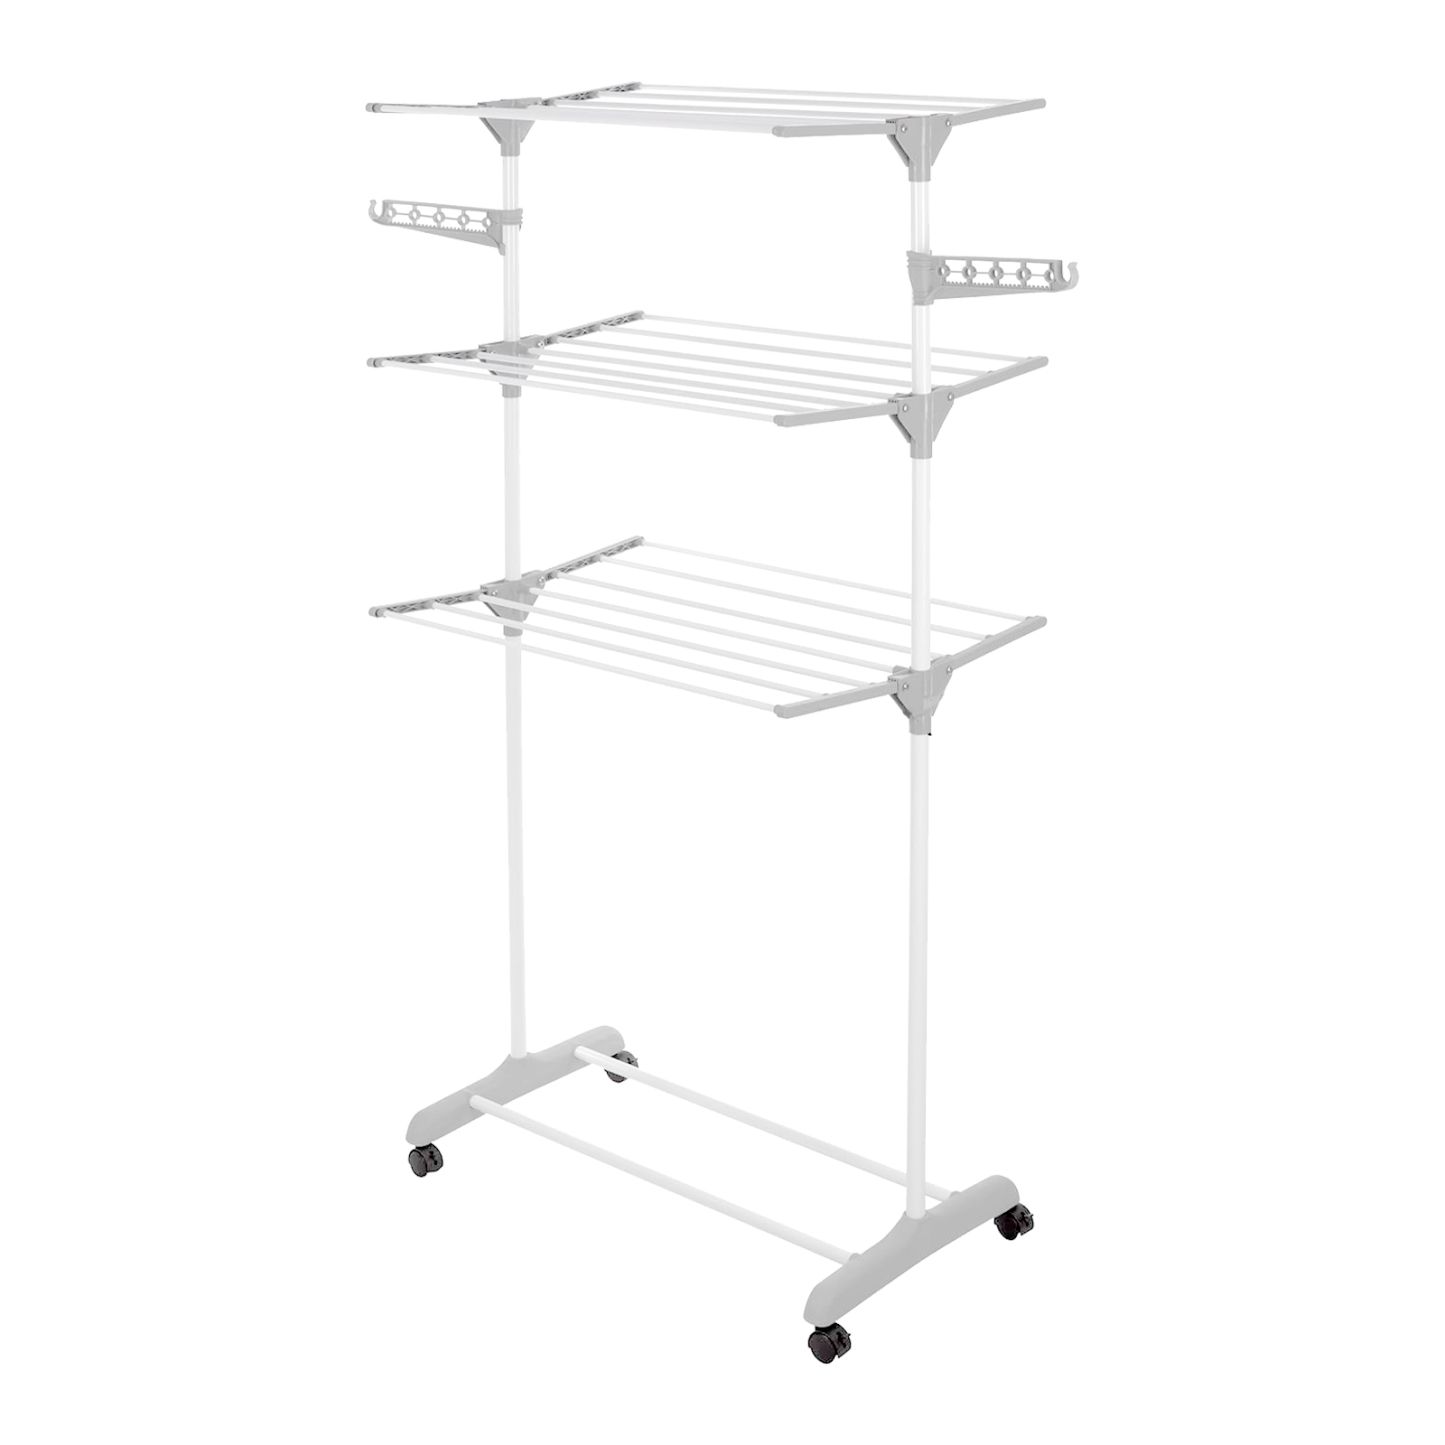 Discover the HOUZE Ficar 3-Tier Foldable Rolling Clothes Drying Rack